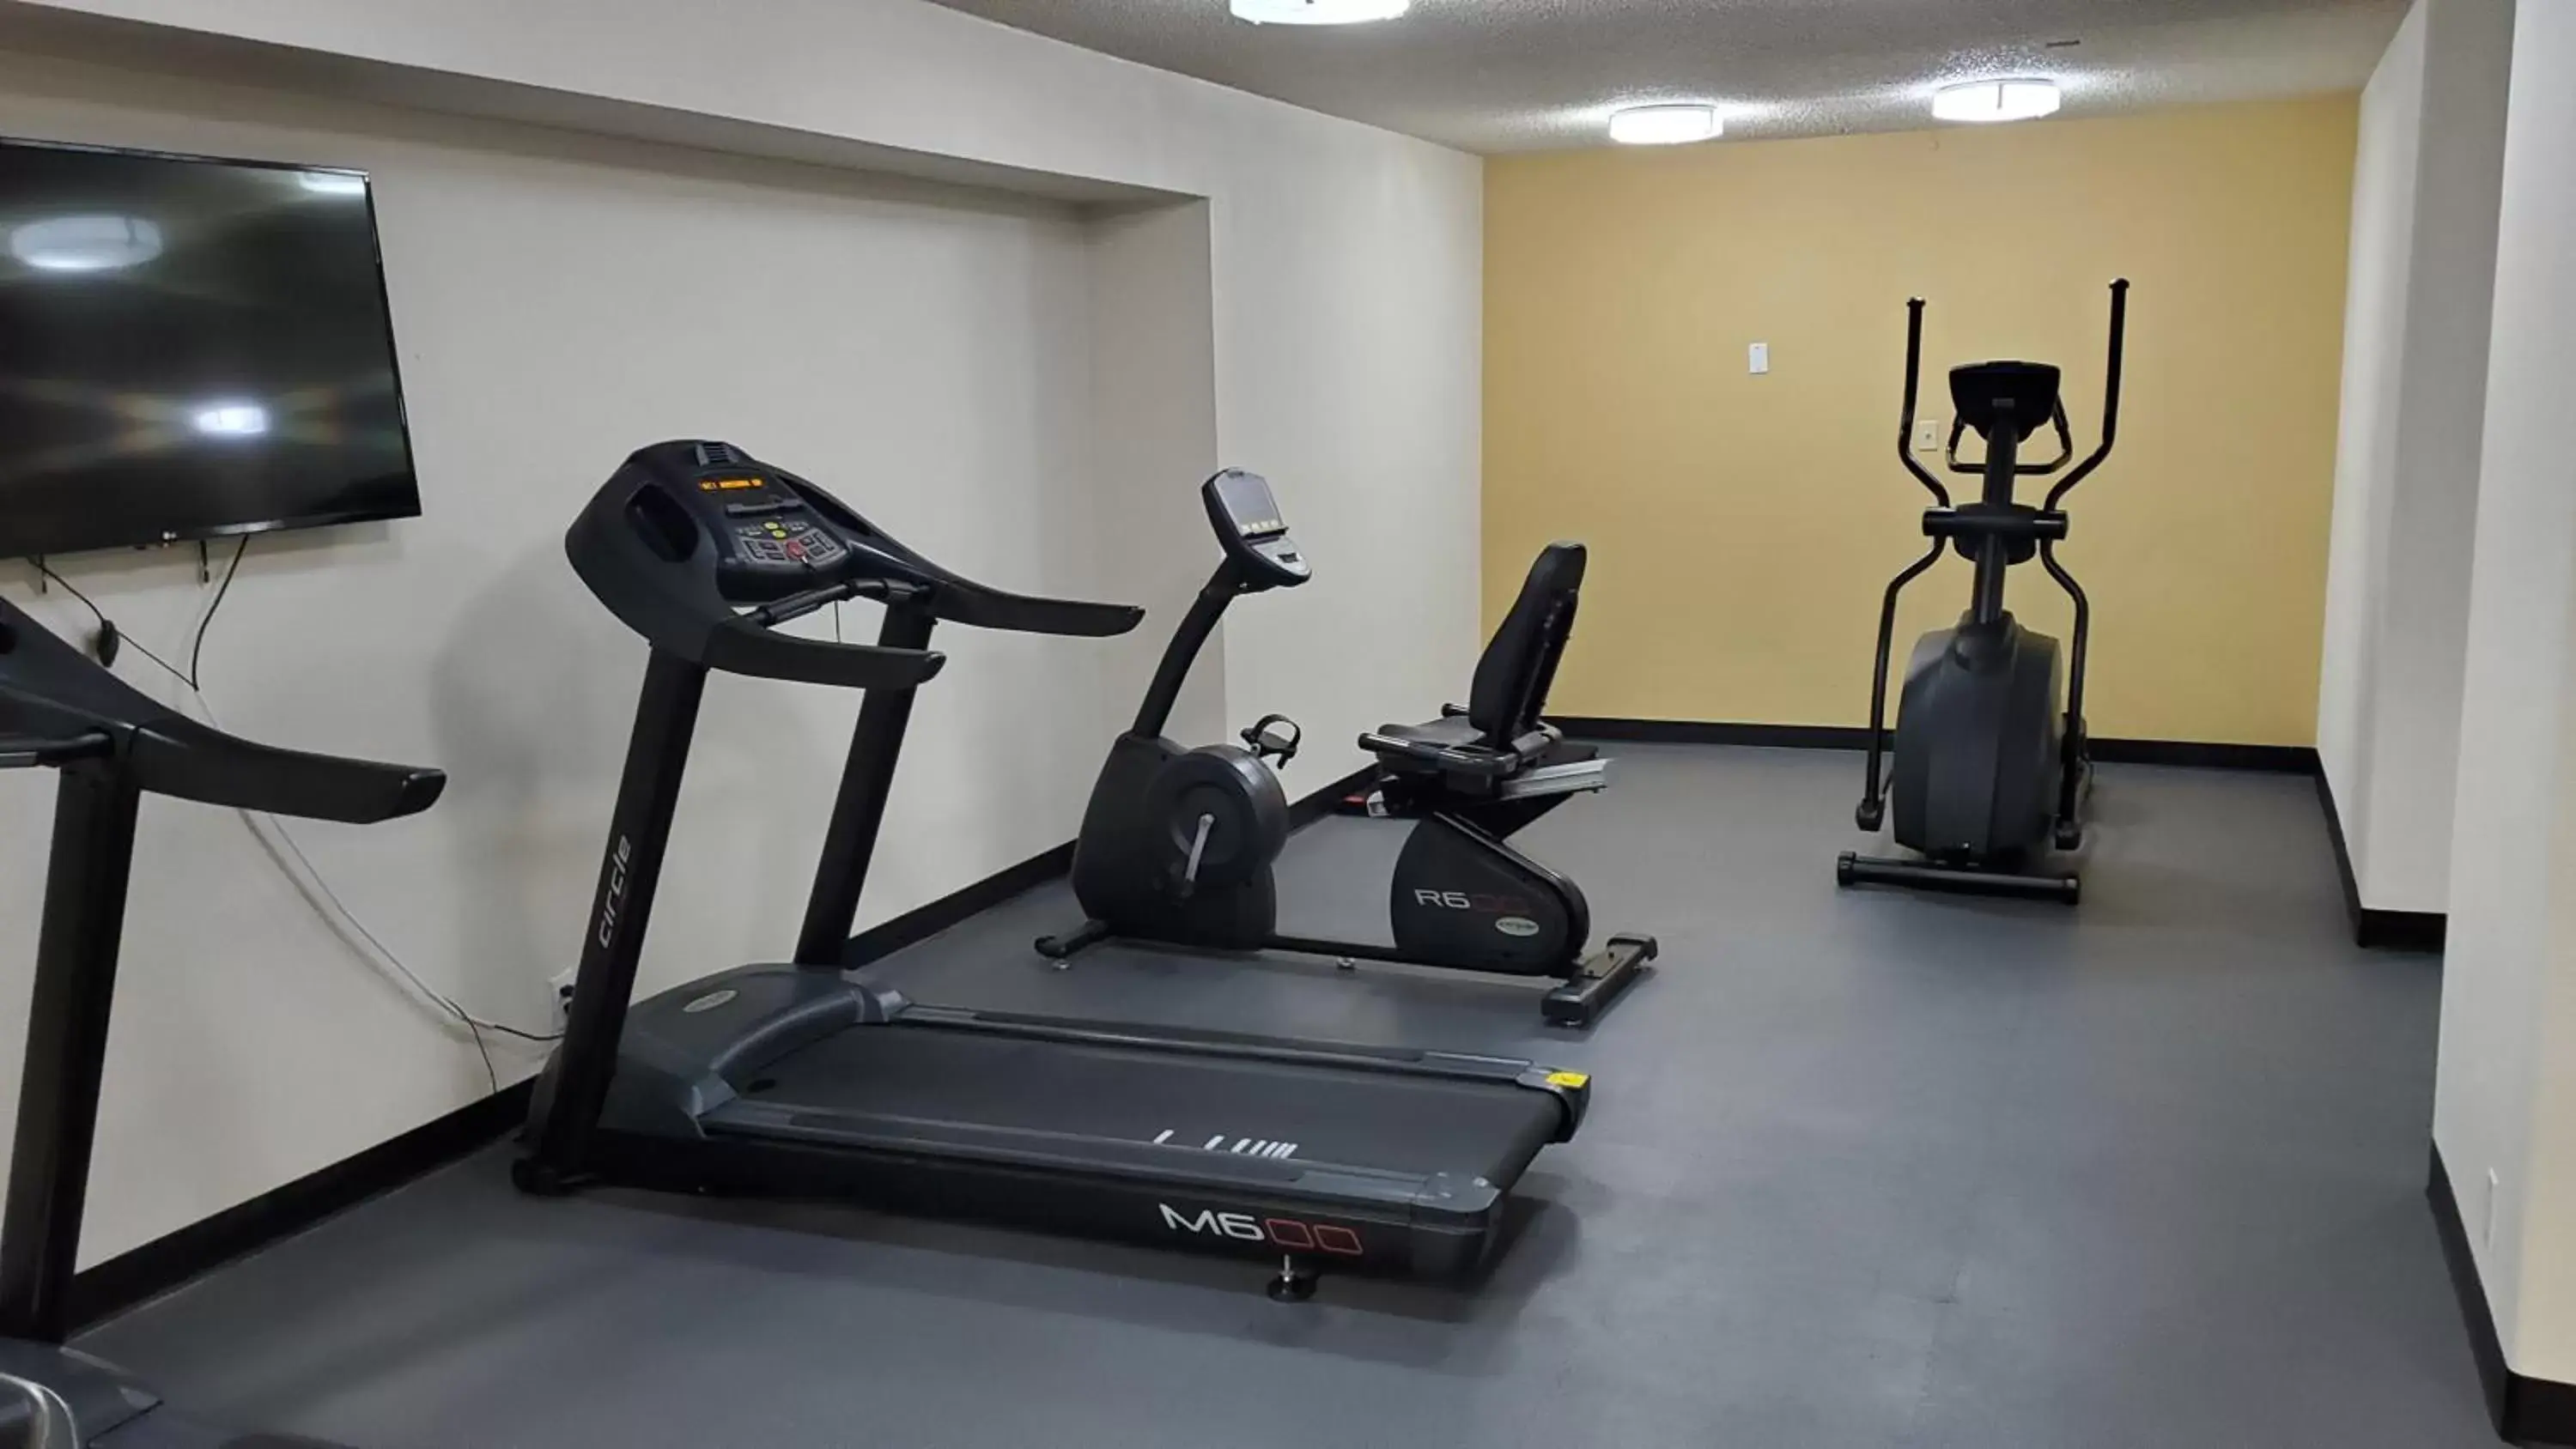 Fitness centre/facilities, Fitness Center/Facilities in Quality Inn & Suites Alamosa